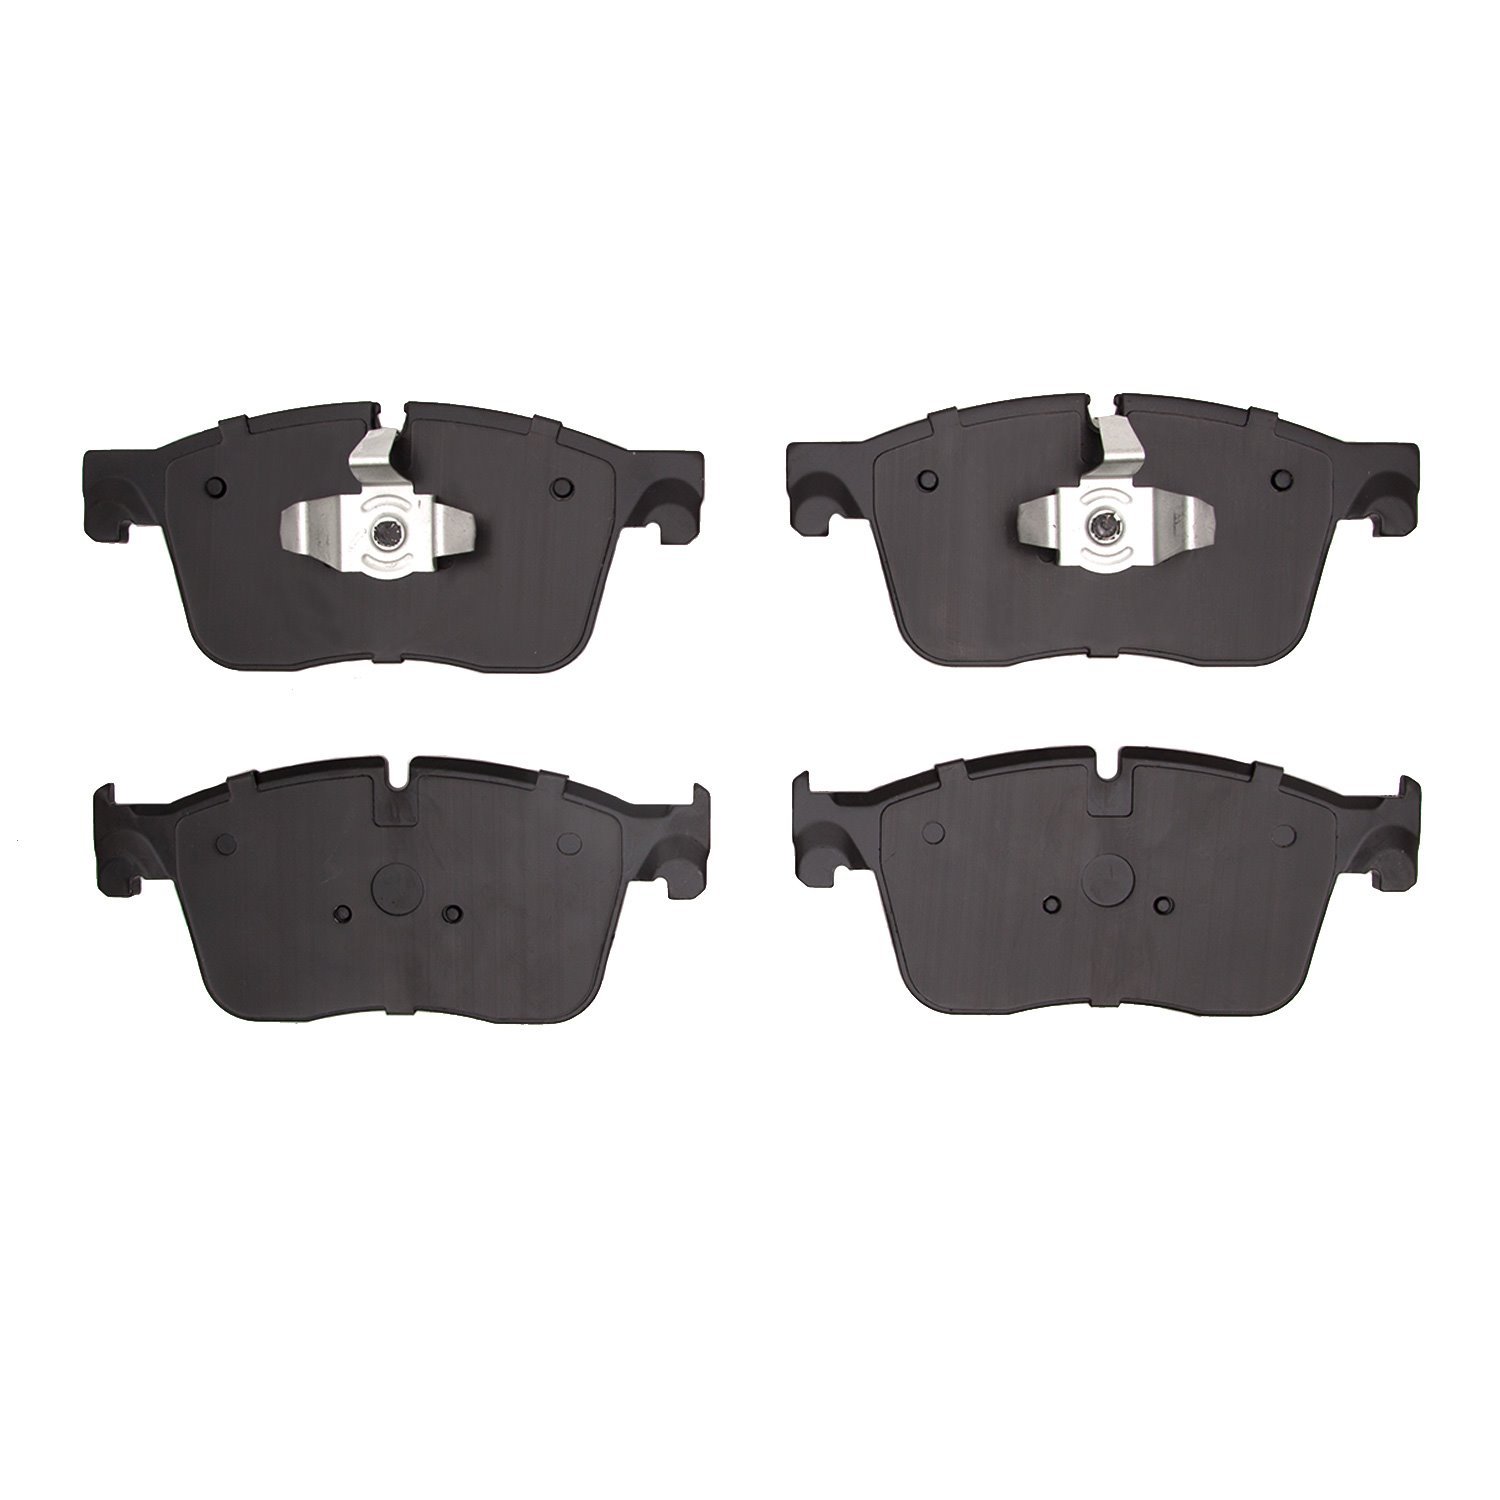 1311-1861-00 3000-Series Semi-Metallic Brake Pads, Fits Select Multiple Makes/Models, Position: Front